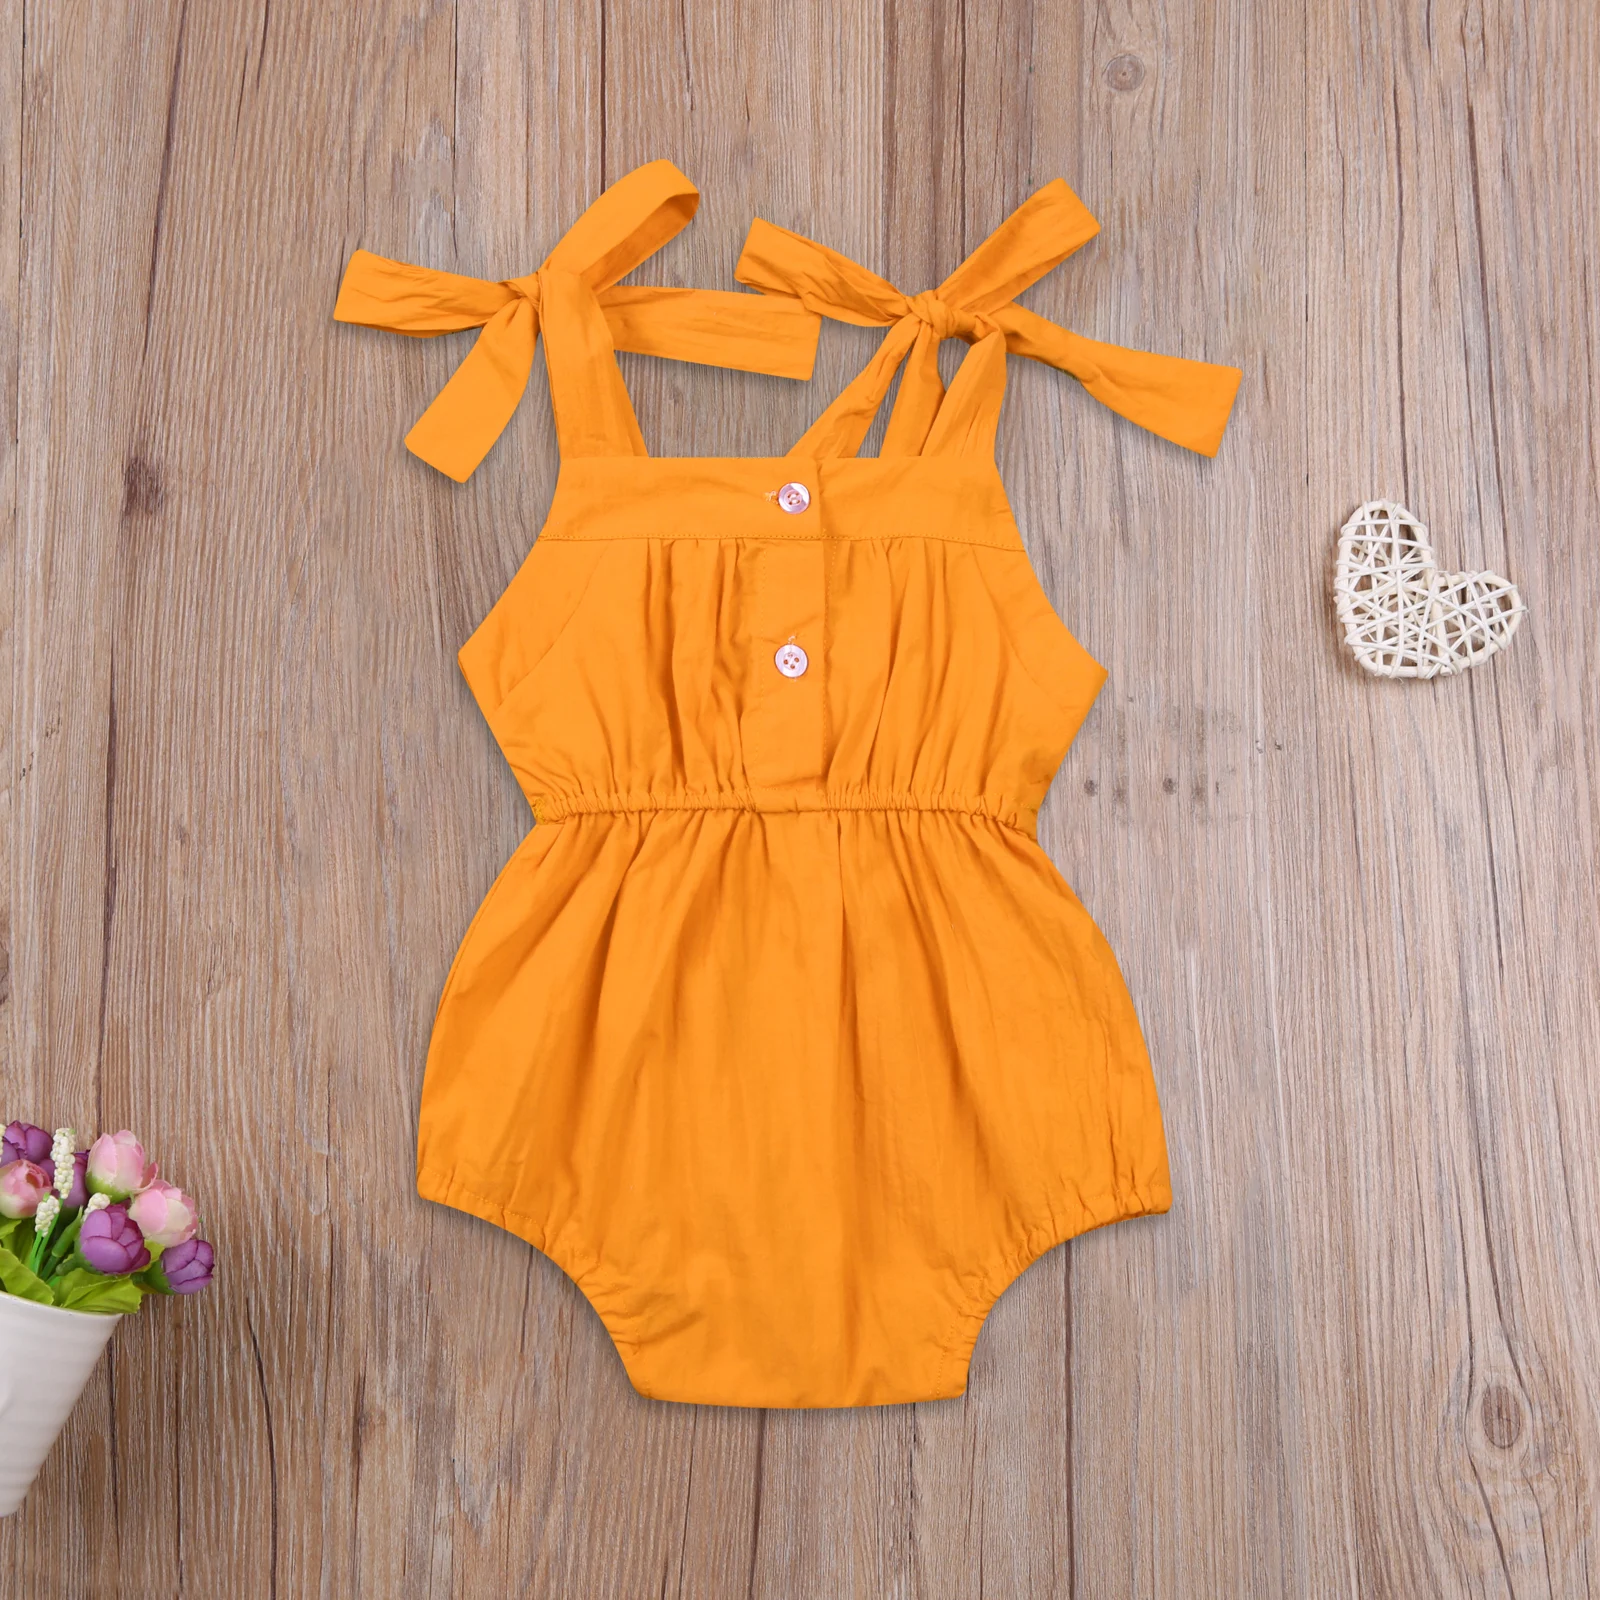 

Pudcoco 0-18M Toddler Baby Girl Summer Double Bows Sleeveless Bodysuit Back Buttons Single Breasted Infant Outfit 3 Color